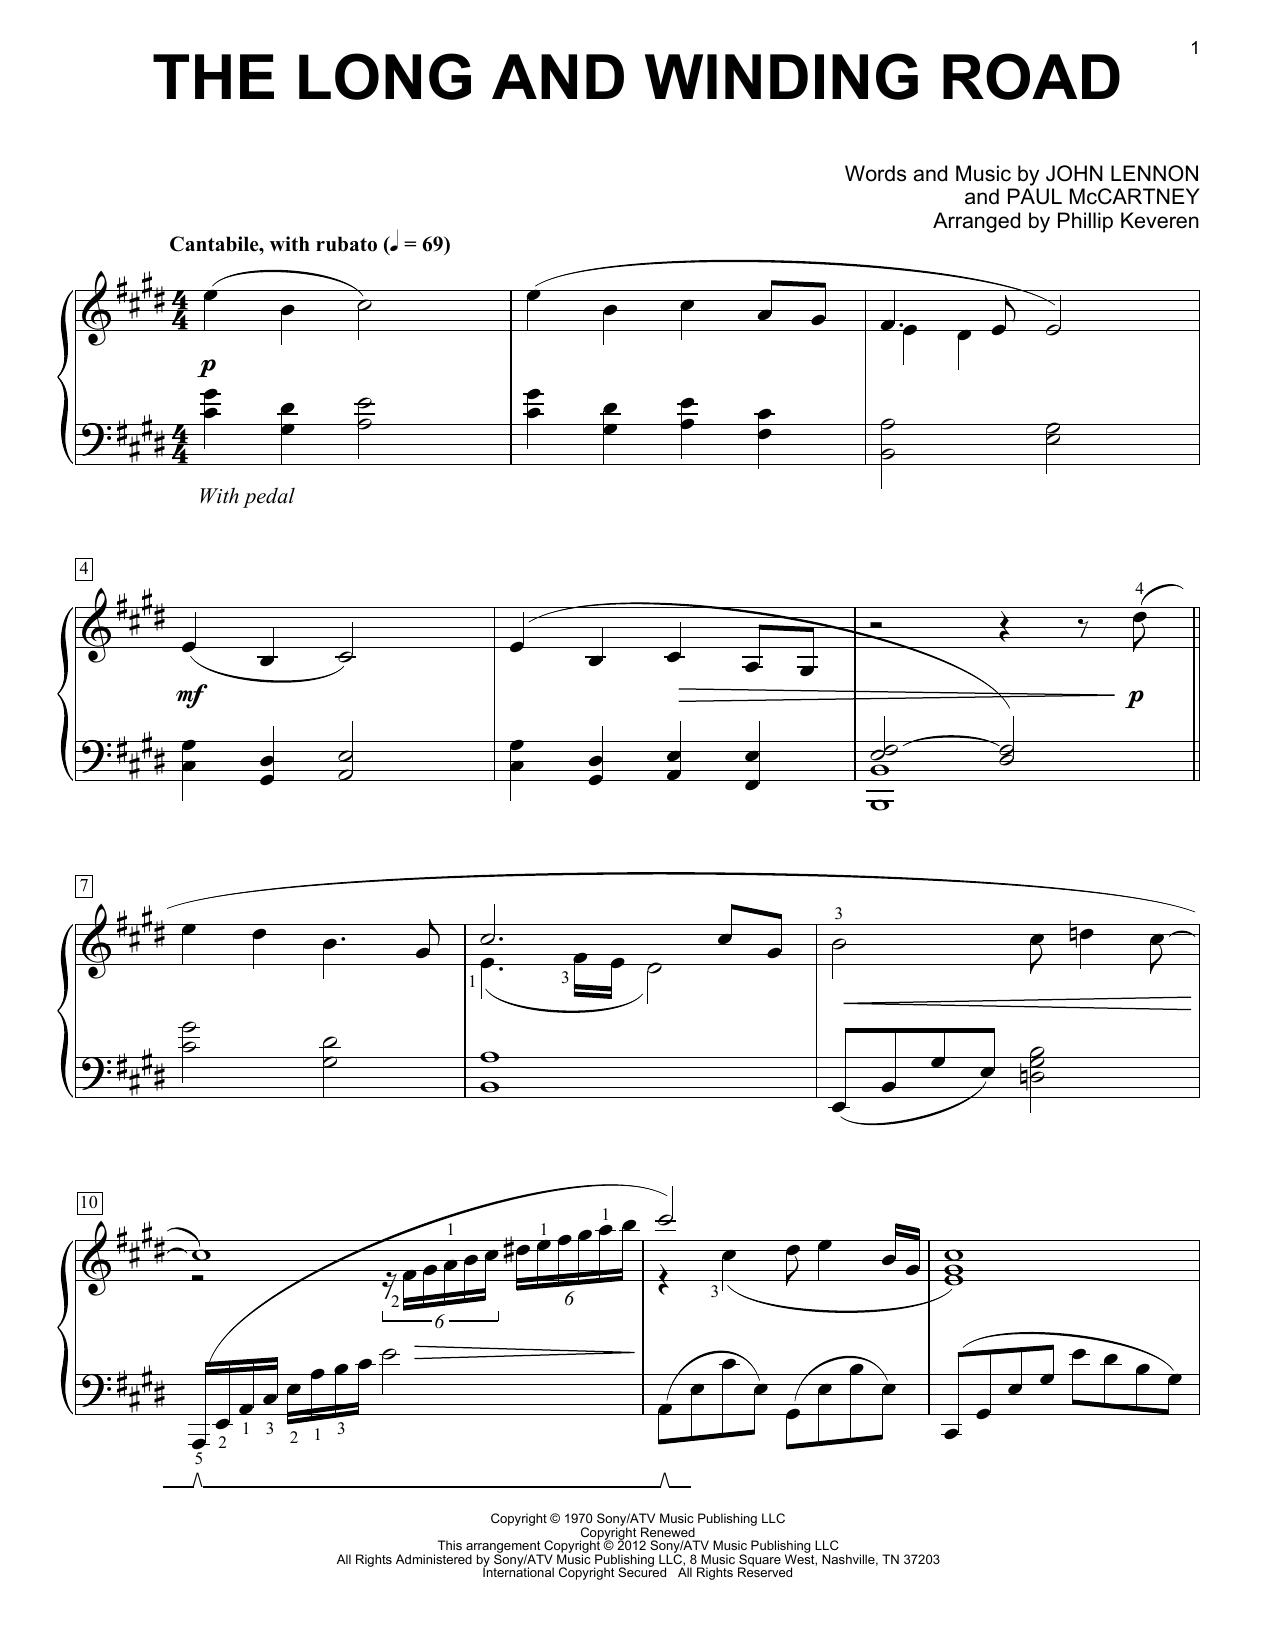 Download The Beatles The Long And Winding Road [Classical ve Sheet Music